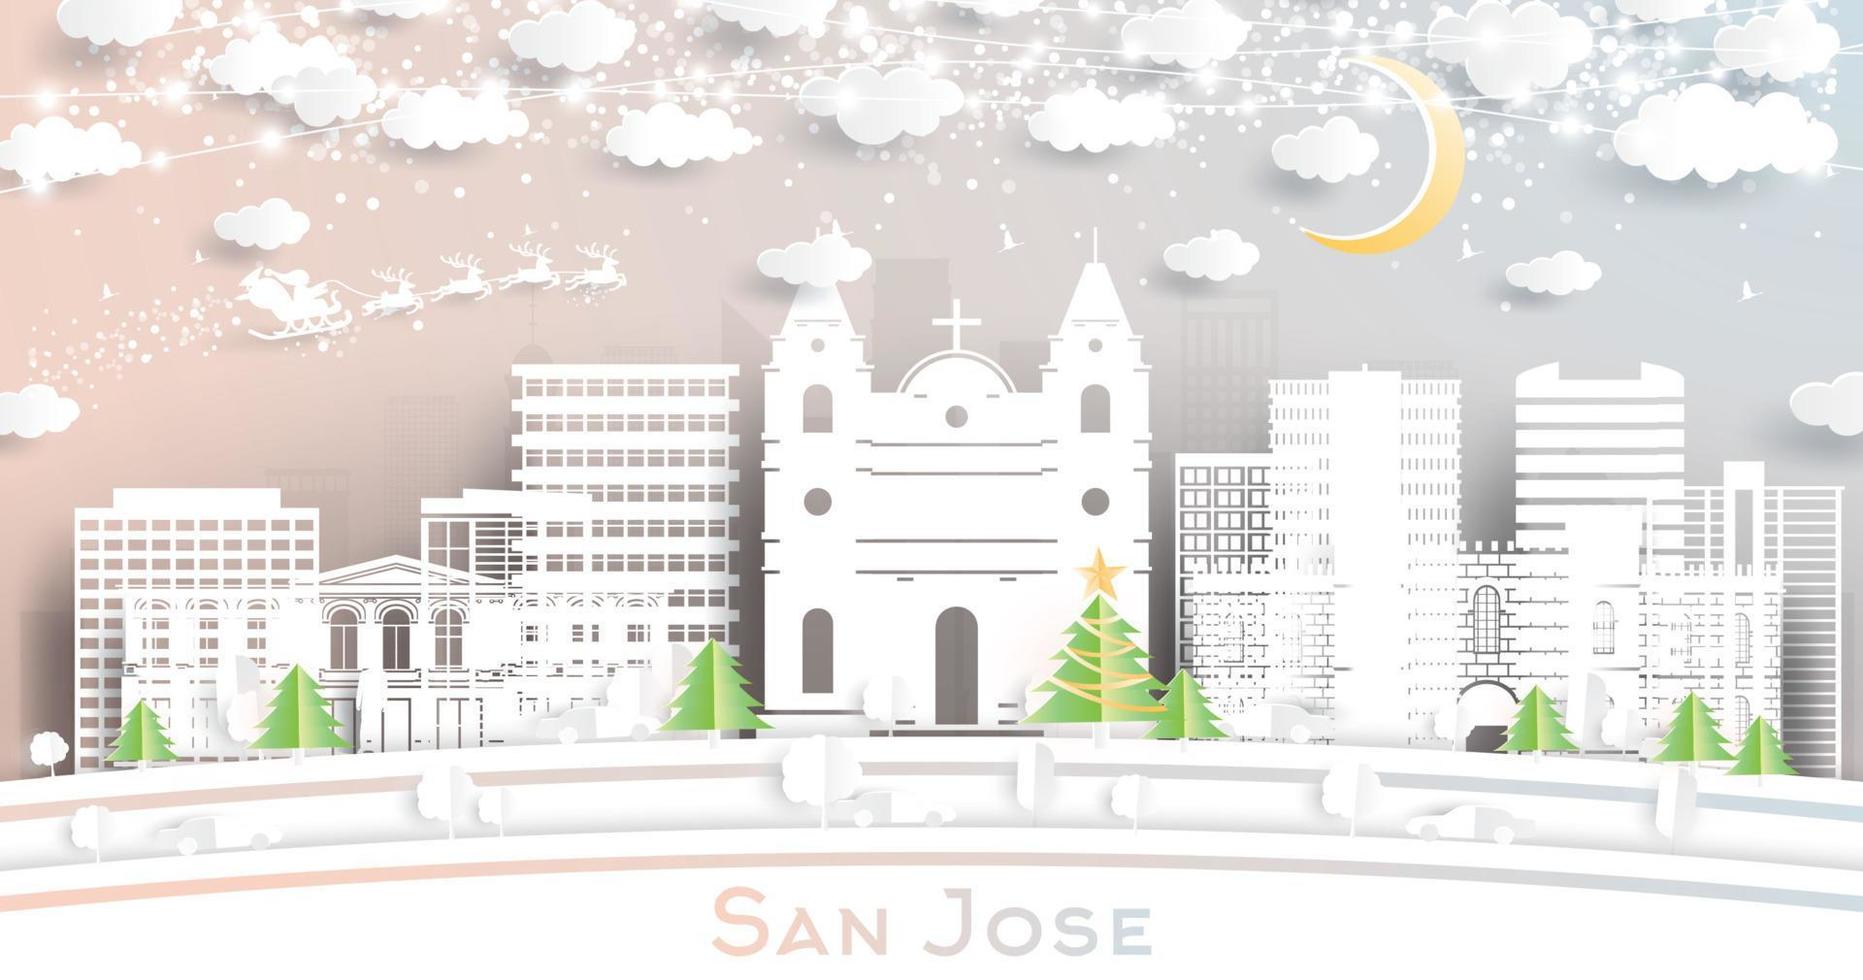 San Jose Costa Rica City Skyline in Paper Cut Style with Snowflakes, Moon and Neon Garland. vector